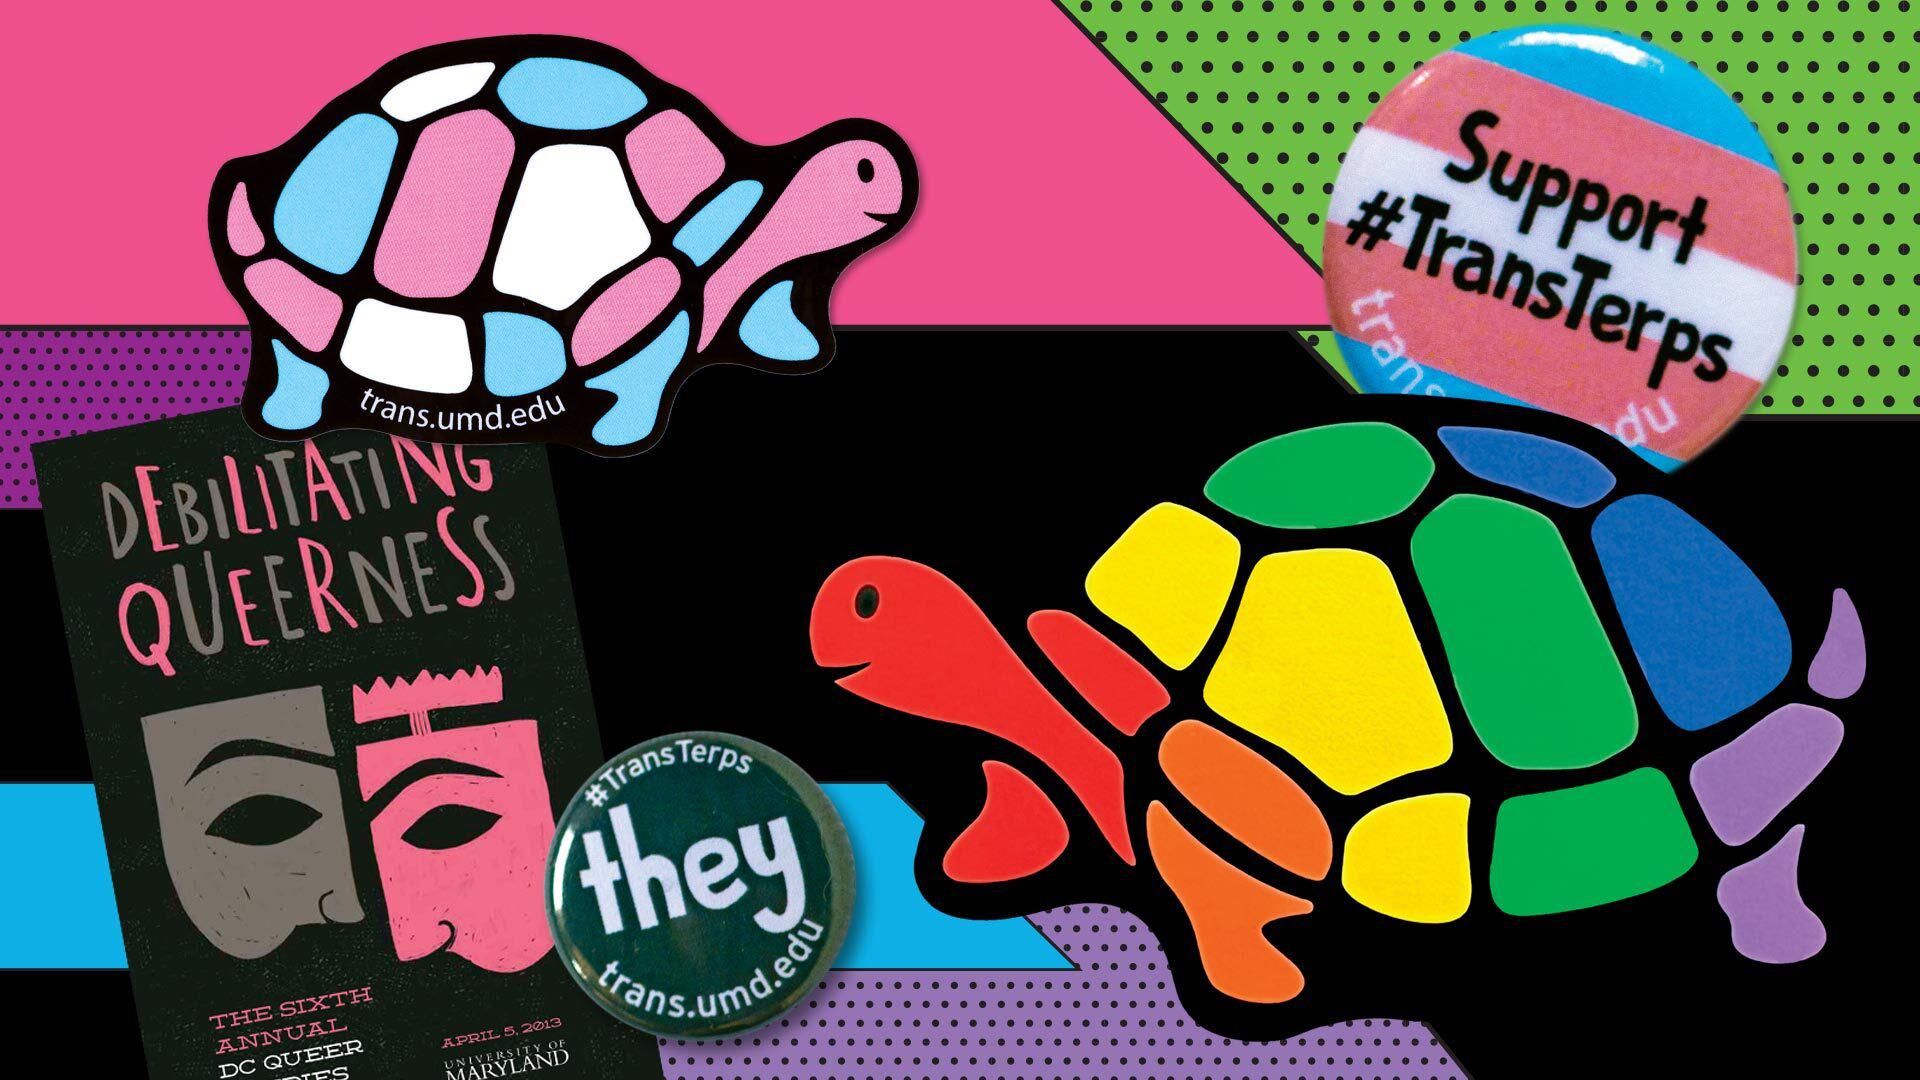 turtle stickers in pride and transgender flag colors, a Support #TransTerps button, a they pronoun button, a Debilitating Queerness program